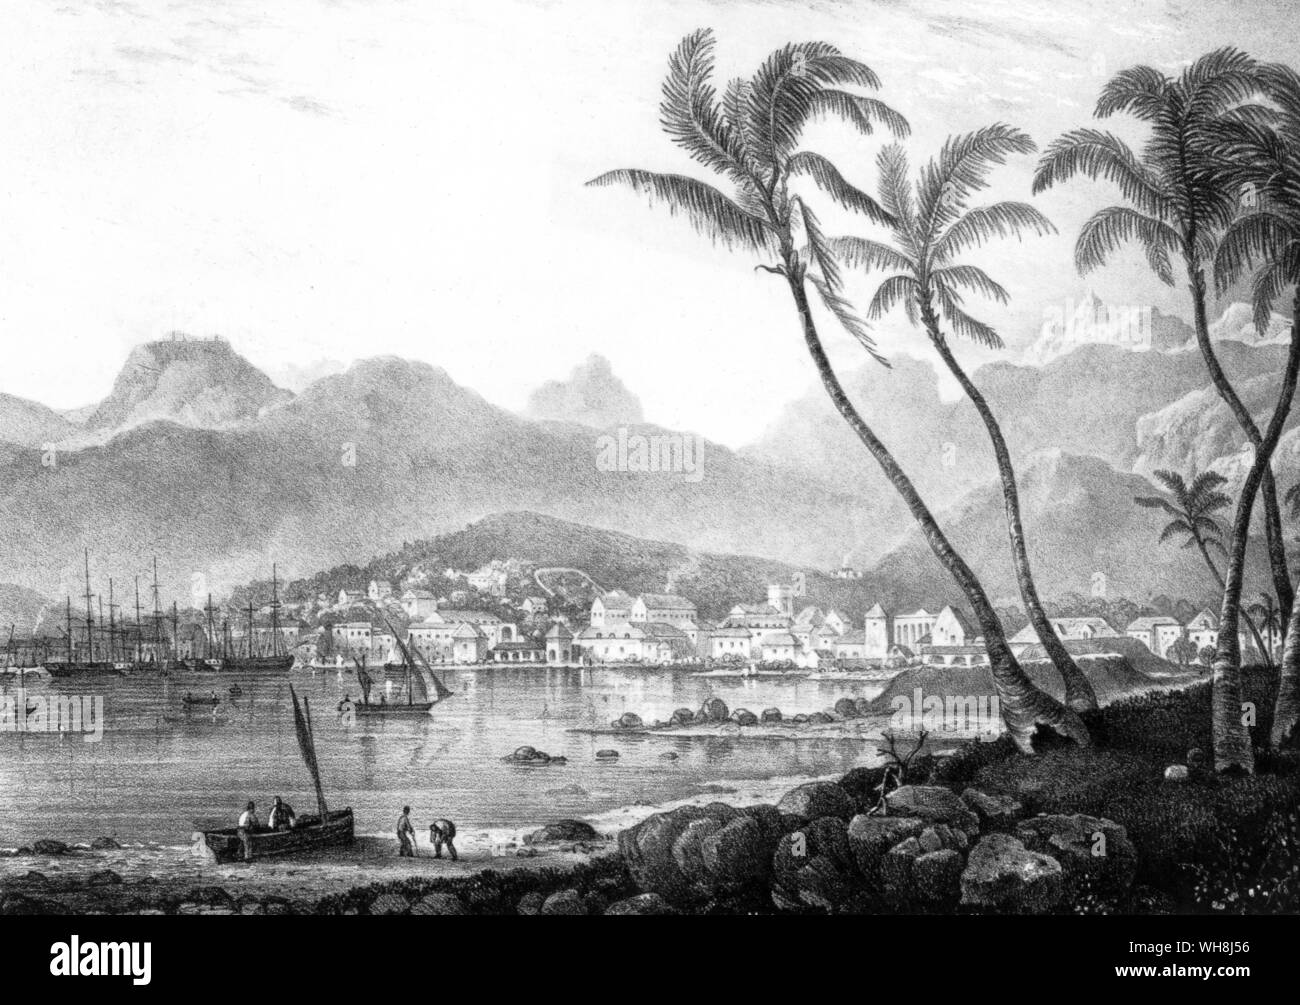 Port Louis, capital of Mauritius. After his disappointment in the landscape of Australasia, Darwin found that 'the aspect of the island equalled the expectations raised by the many well known desriptions of its beautiful scenery'. Darwin and the Beagle by Alan Moorhead, page 238. Stock Photo